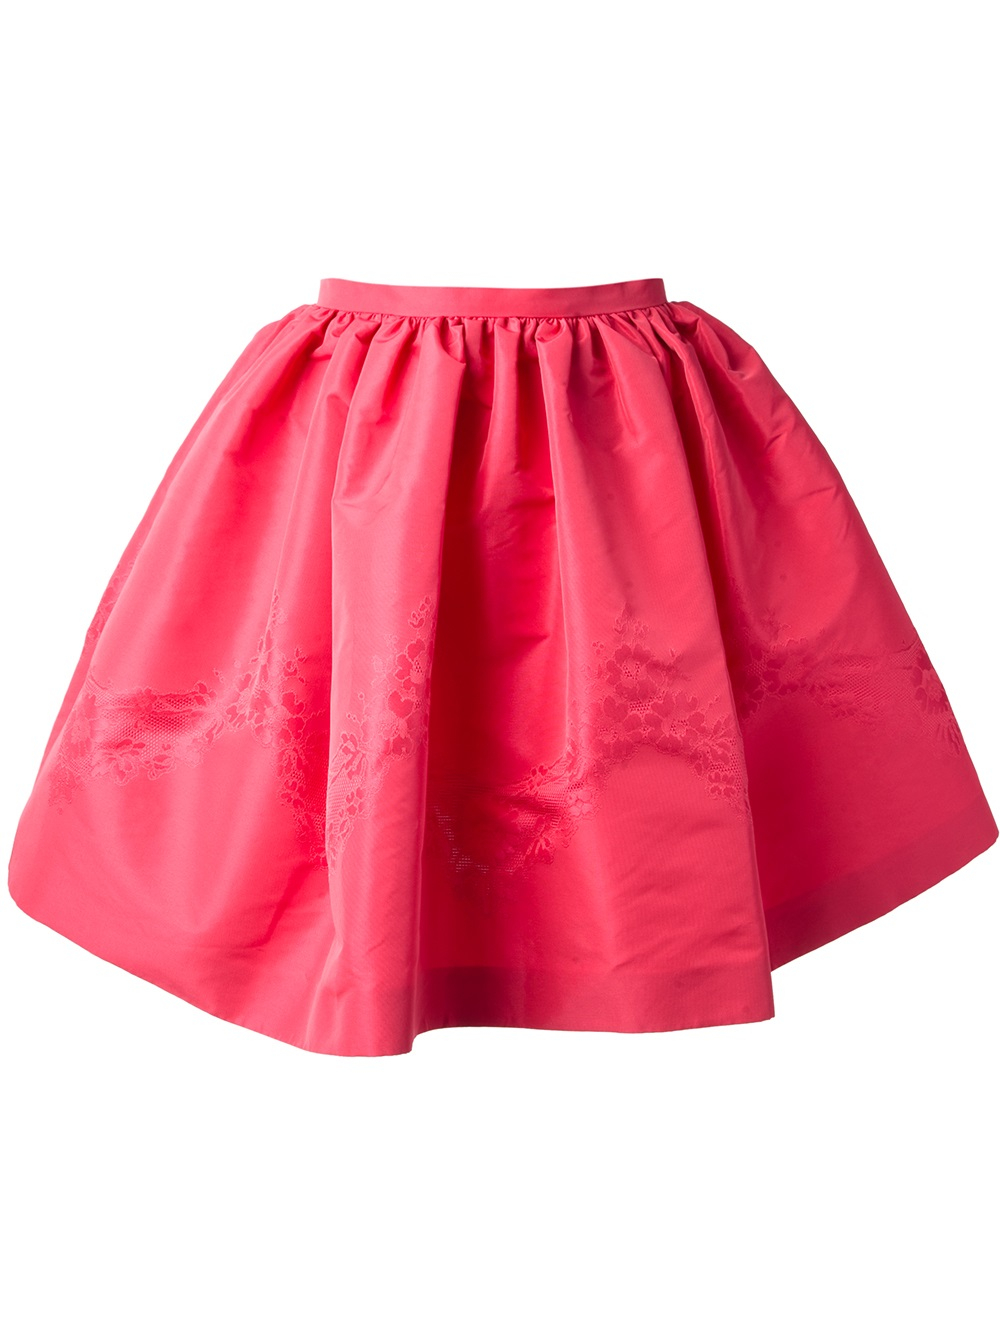 RED Valentino Short Flared Skirt in Pink - Lyst